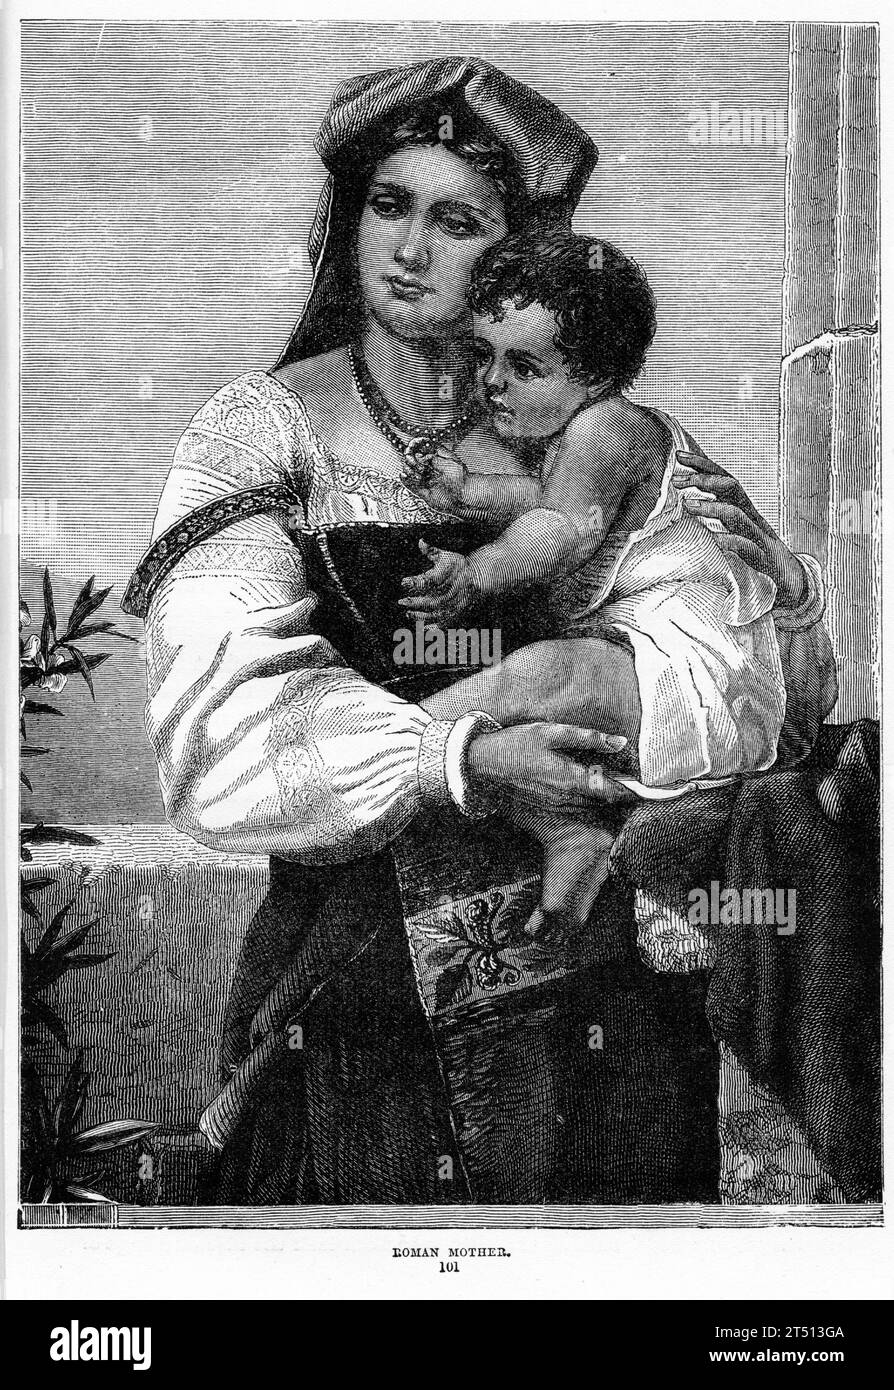 Portrait of a Roman mother. Published circa 1887 Stock Photo